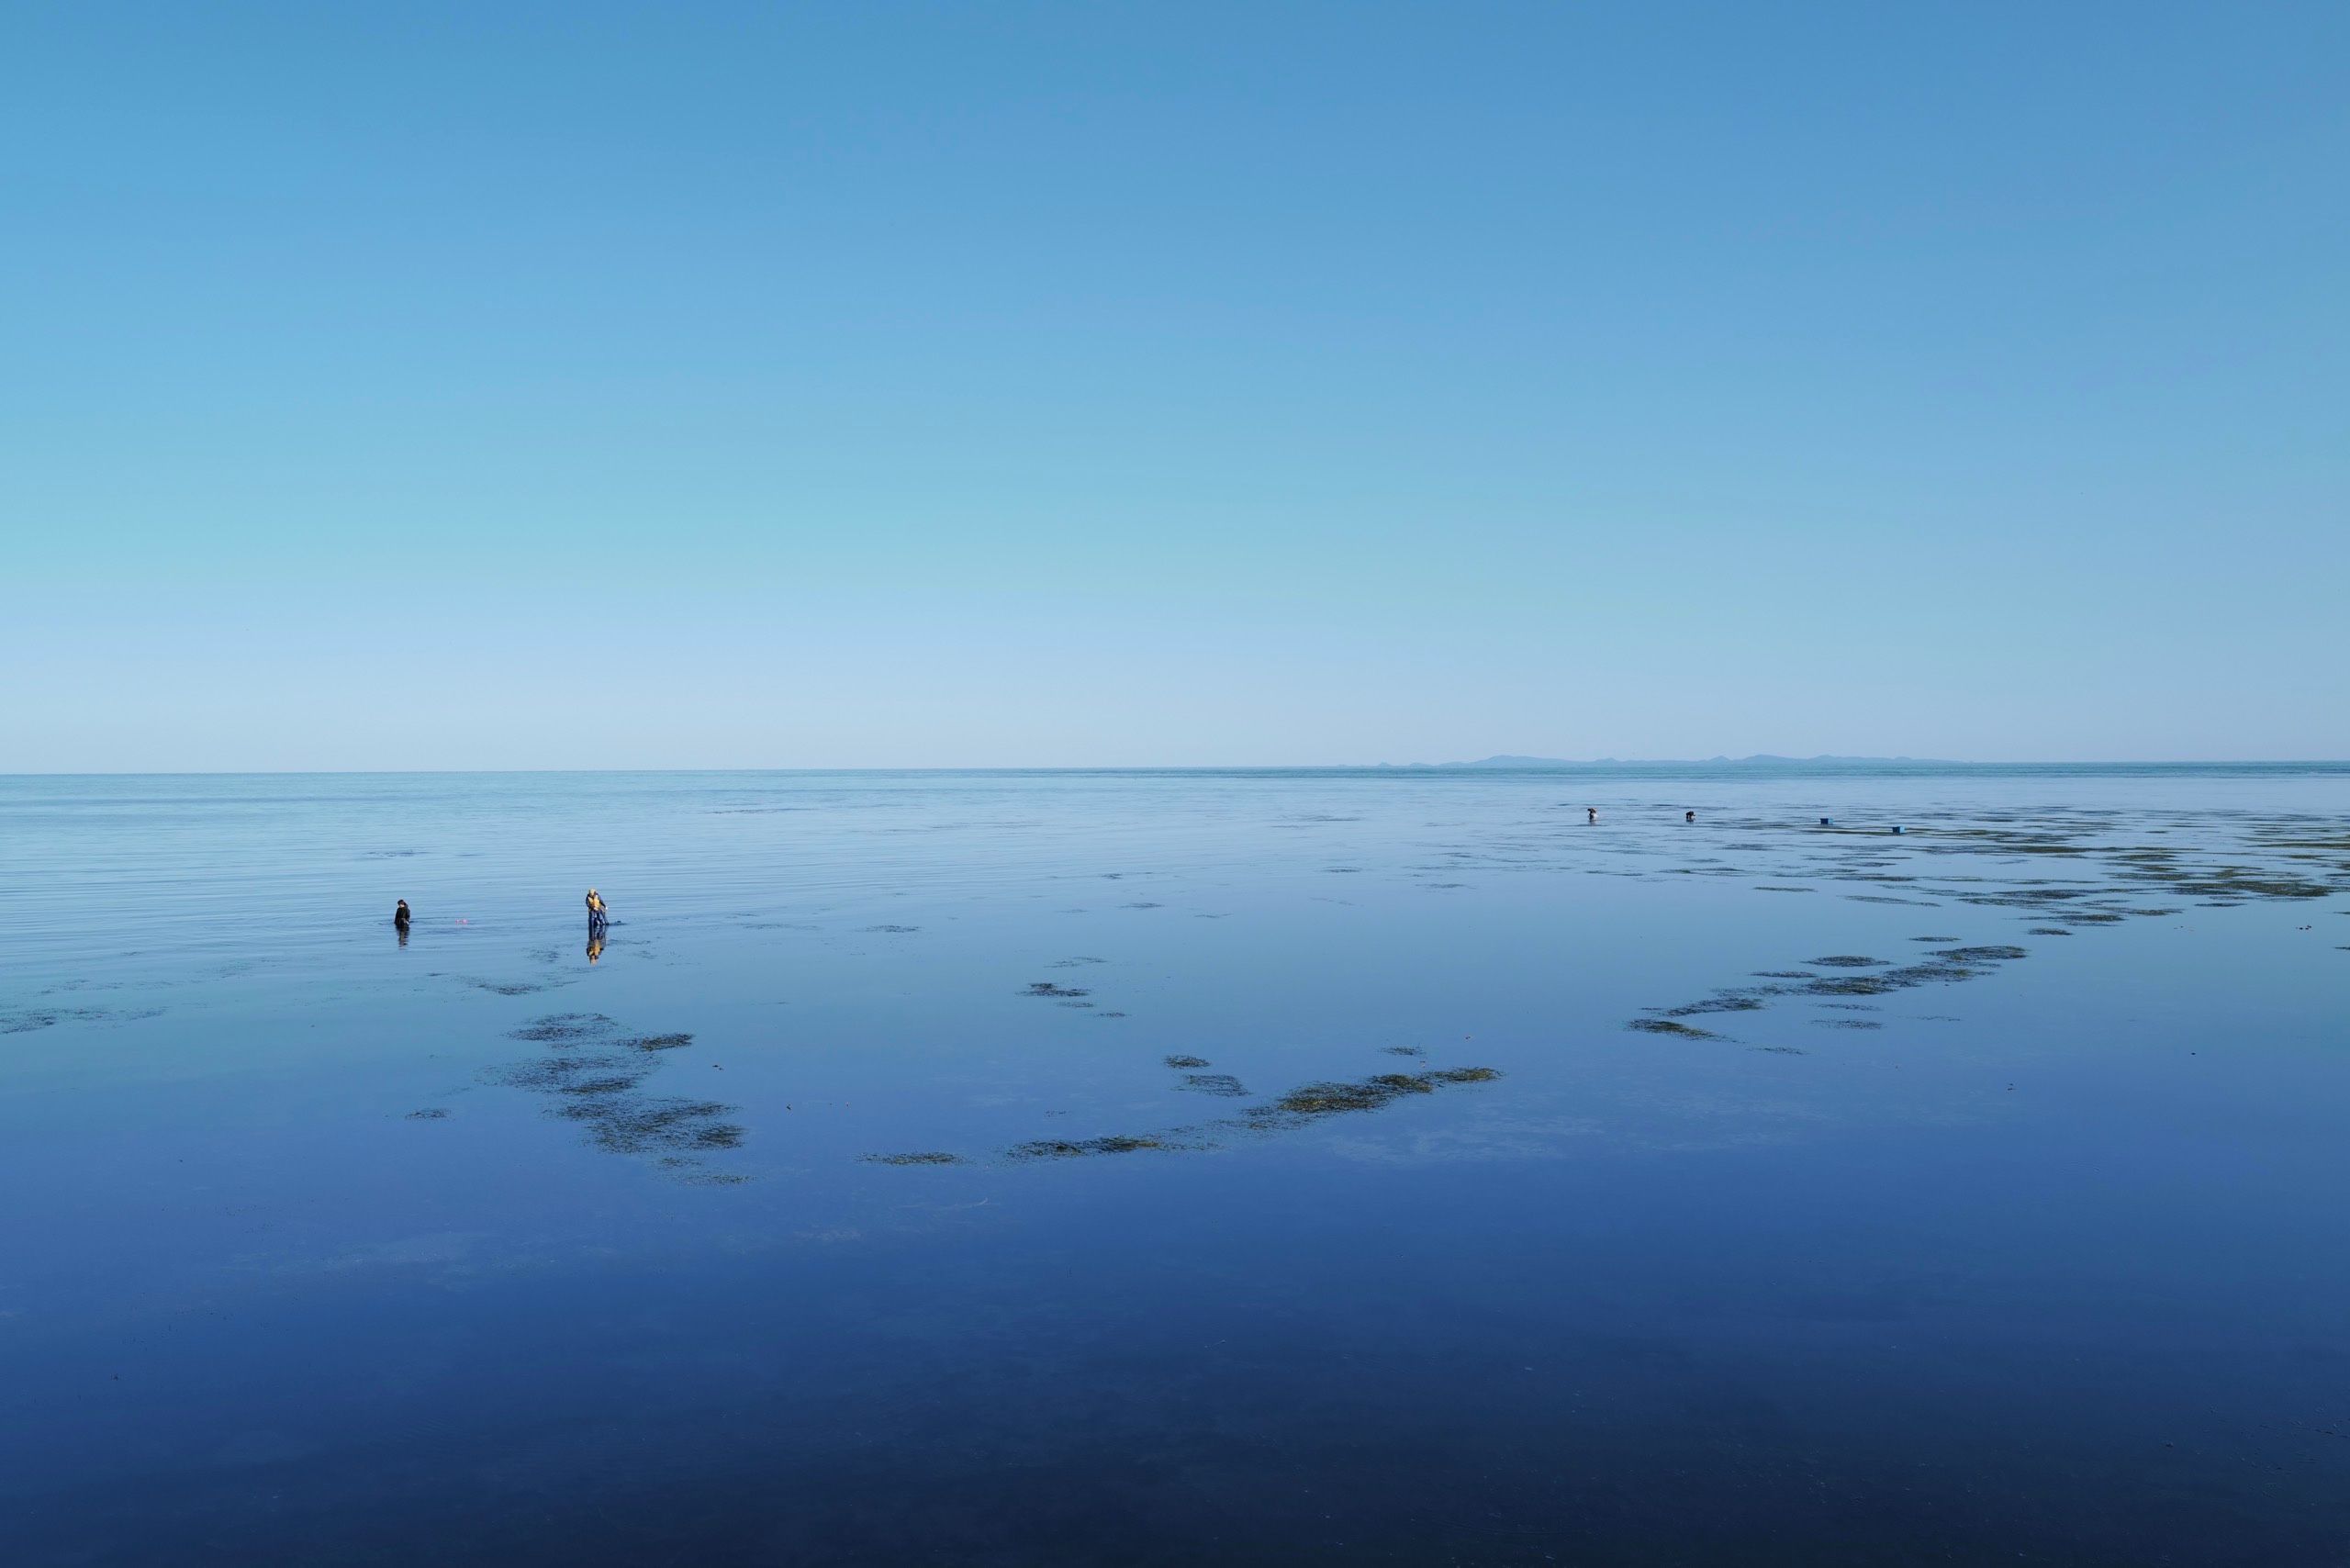 People gather shellfish and seaweed on a flat blue sea with an island, Sakhalin, on the horizon